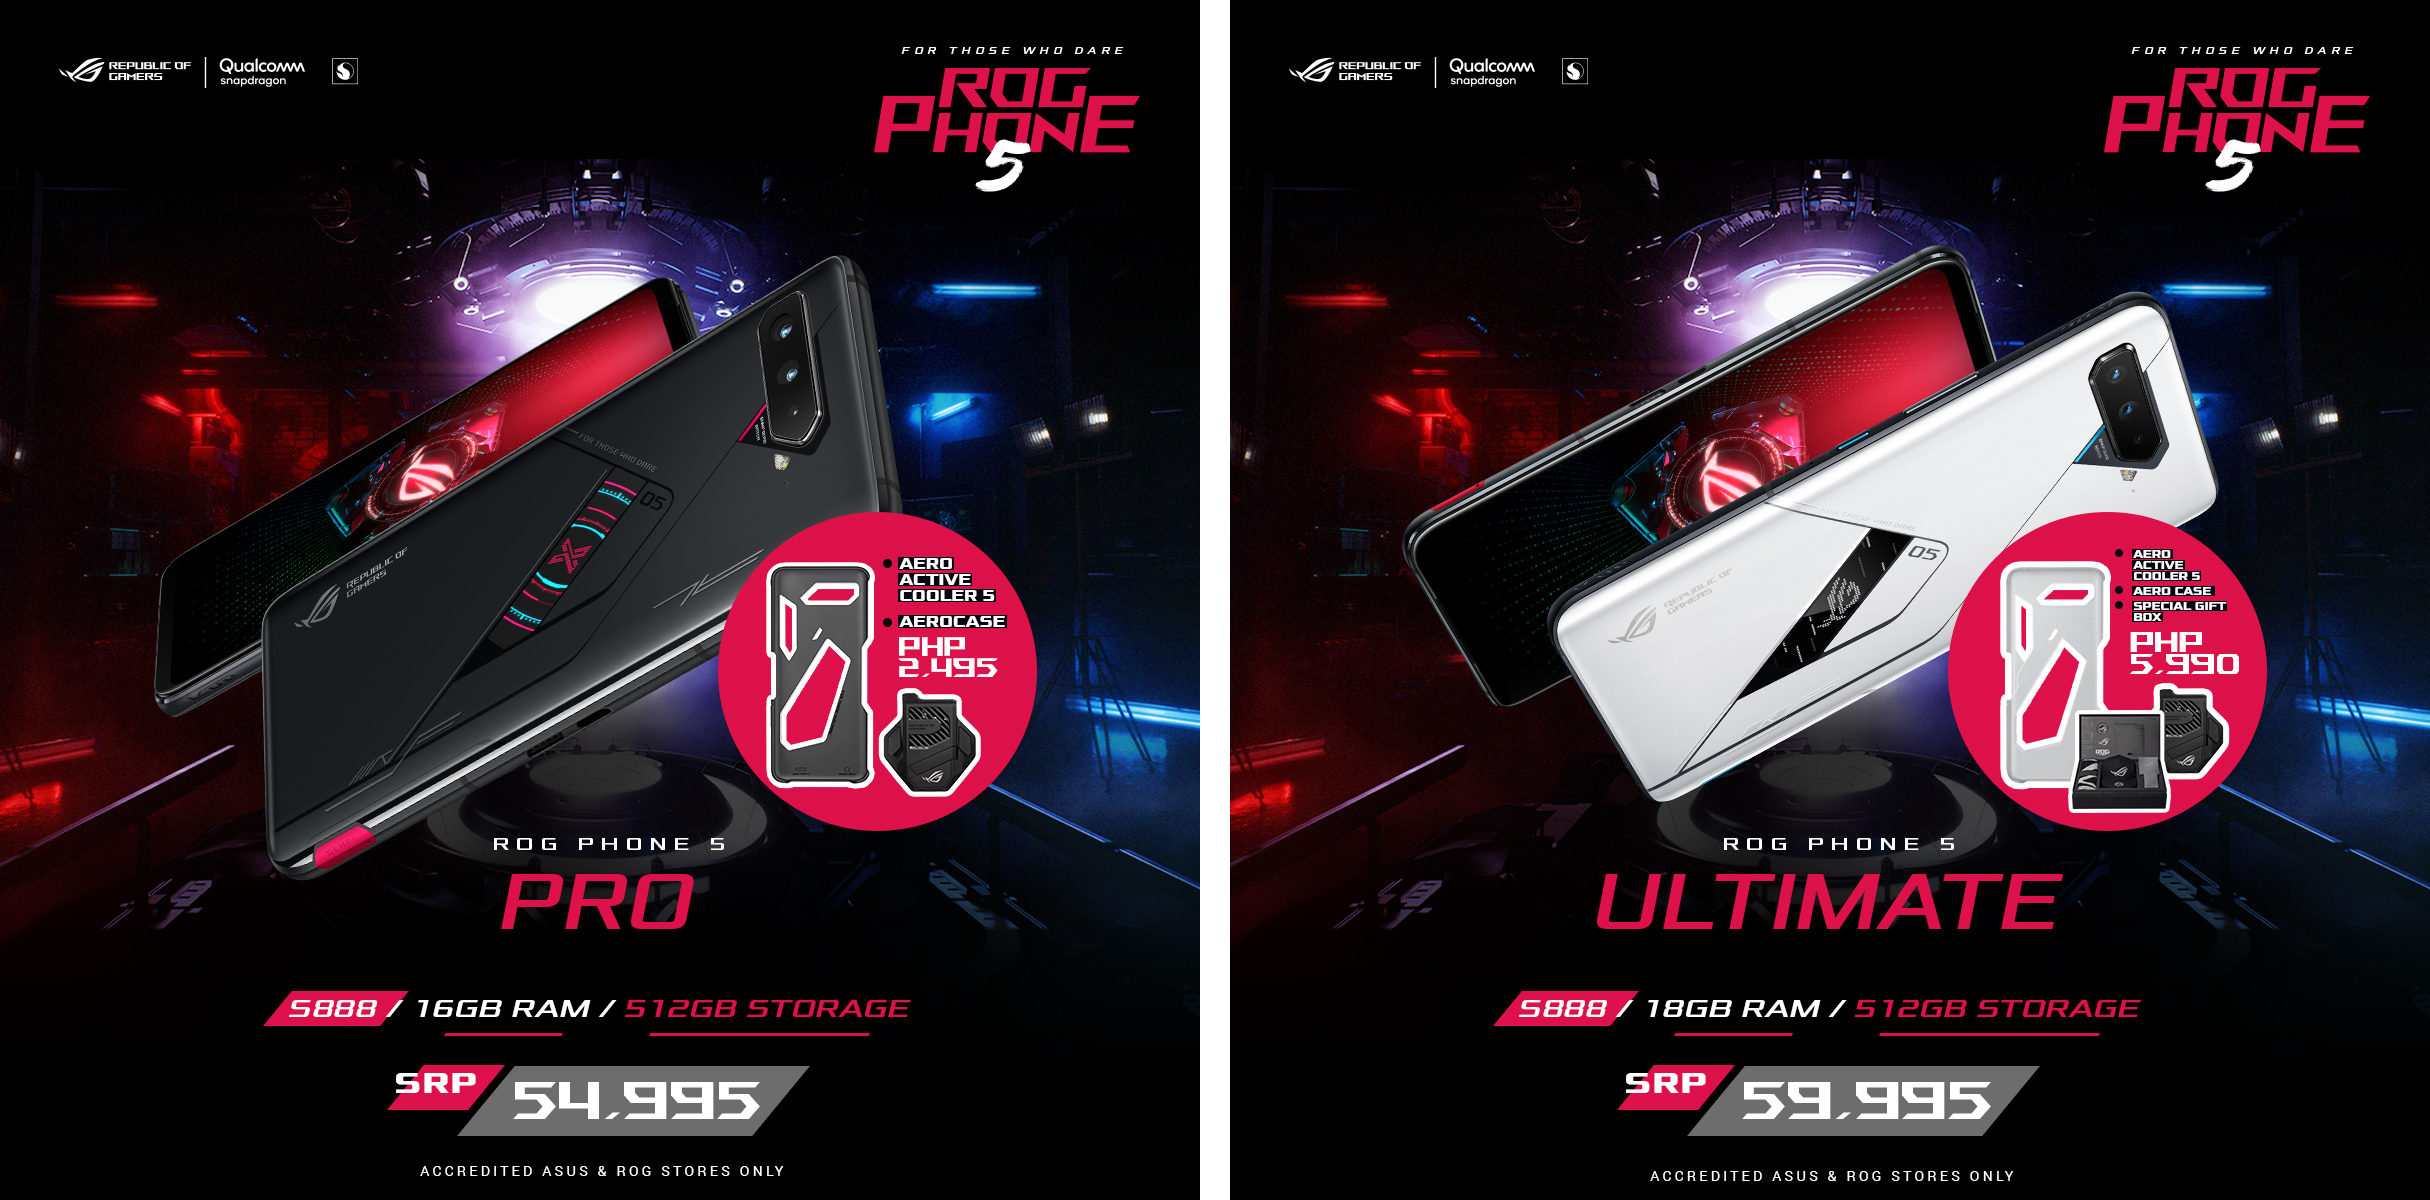 Asus ROG Phone 5 Ultimate and Pro